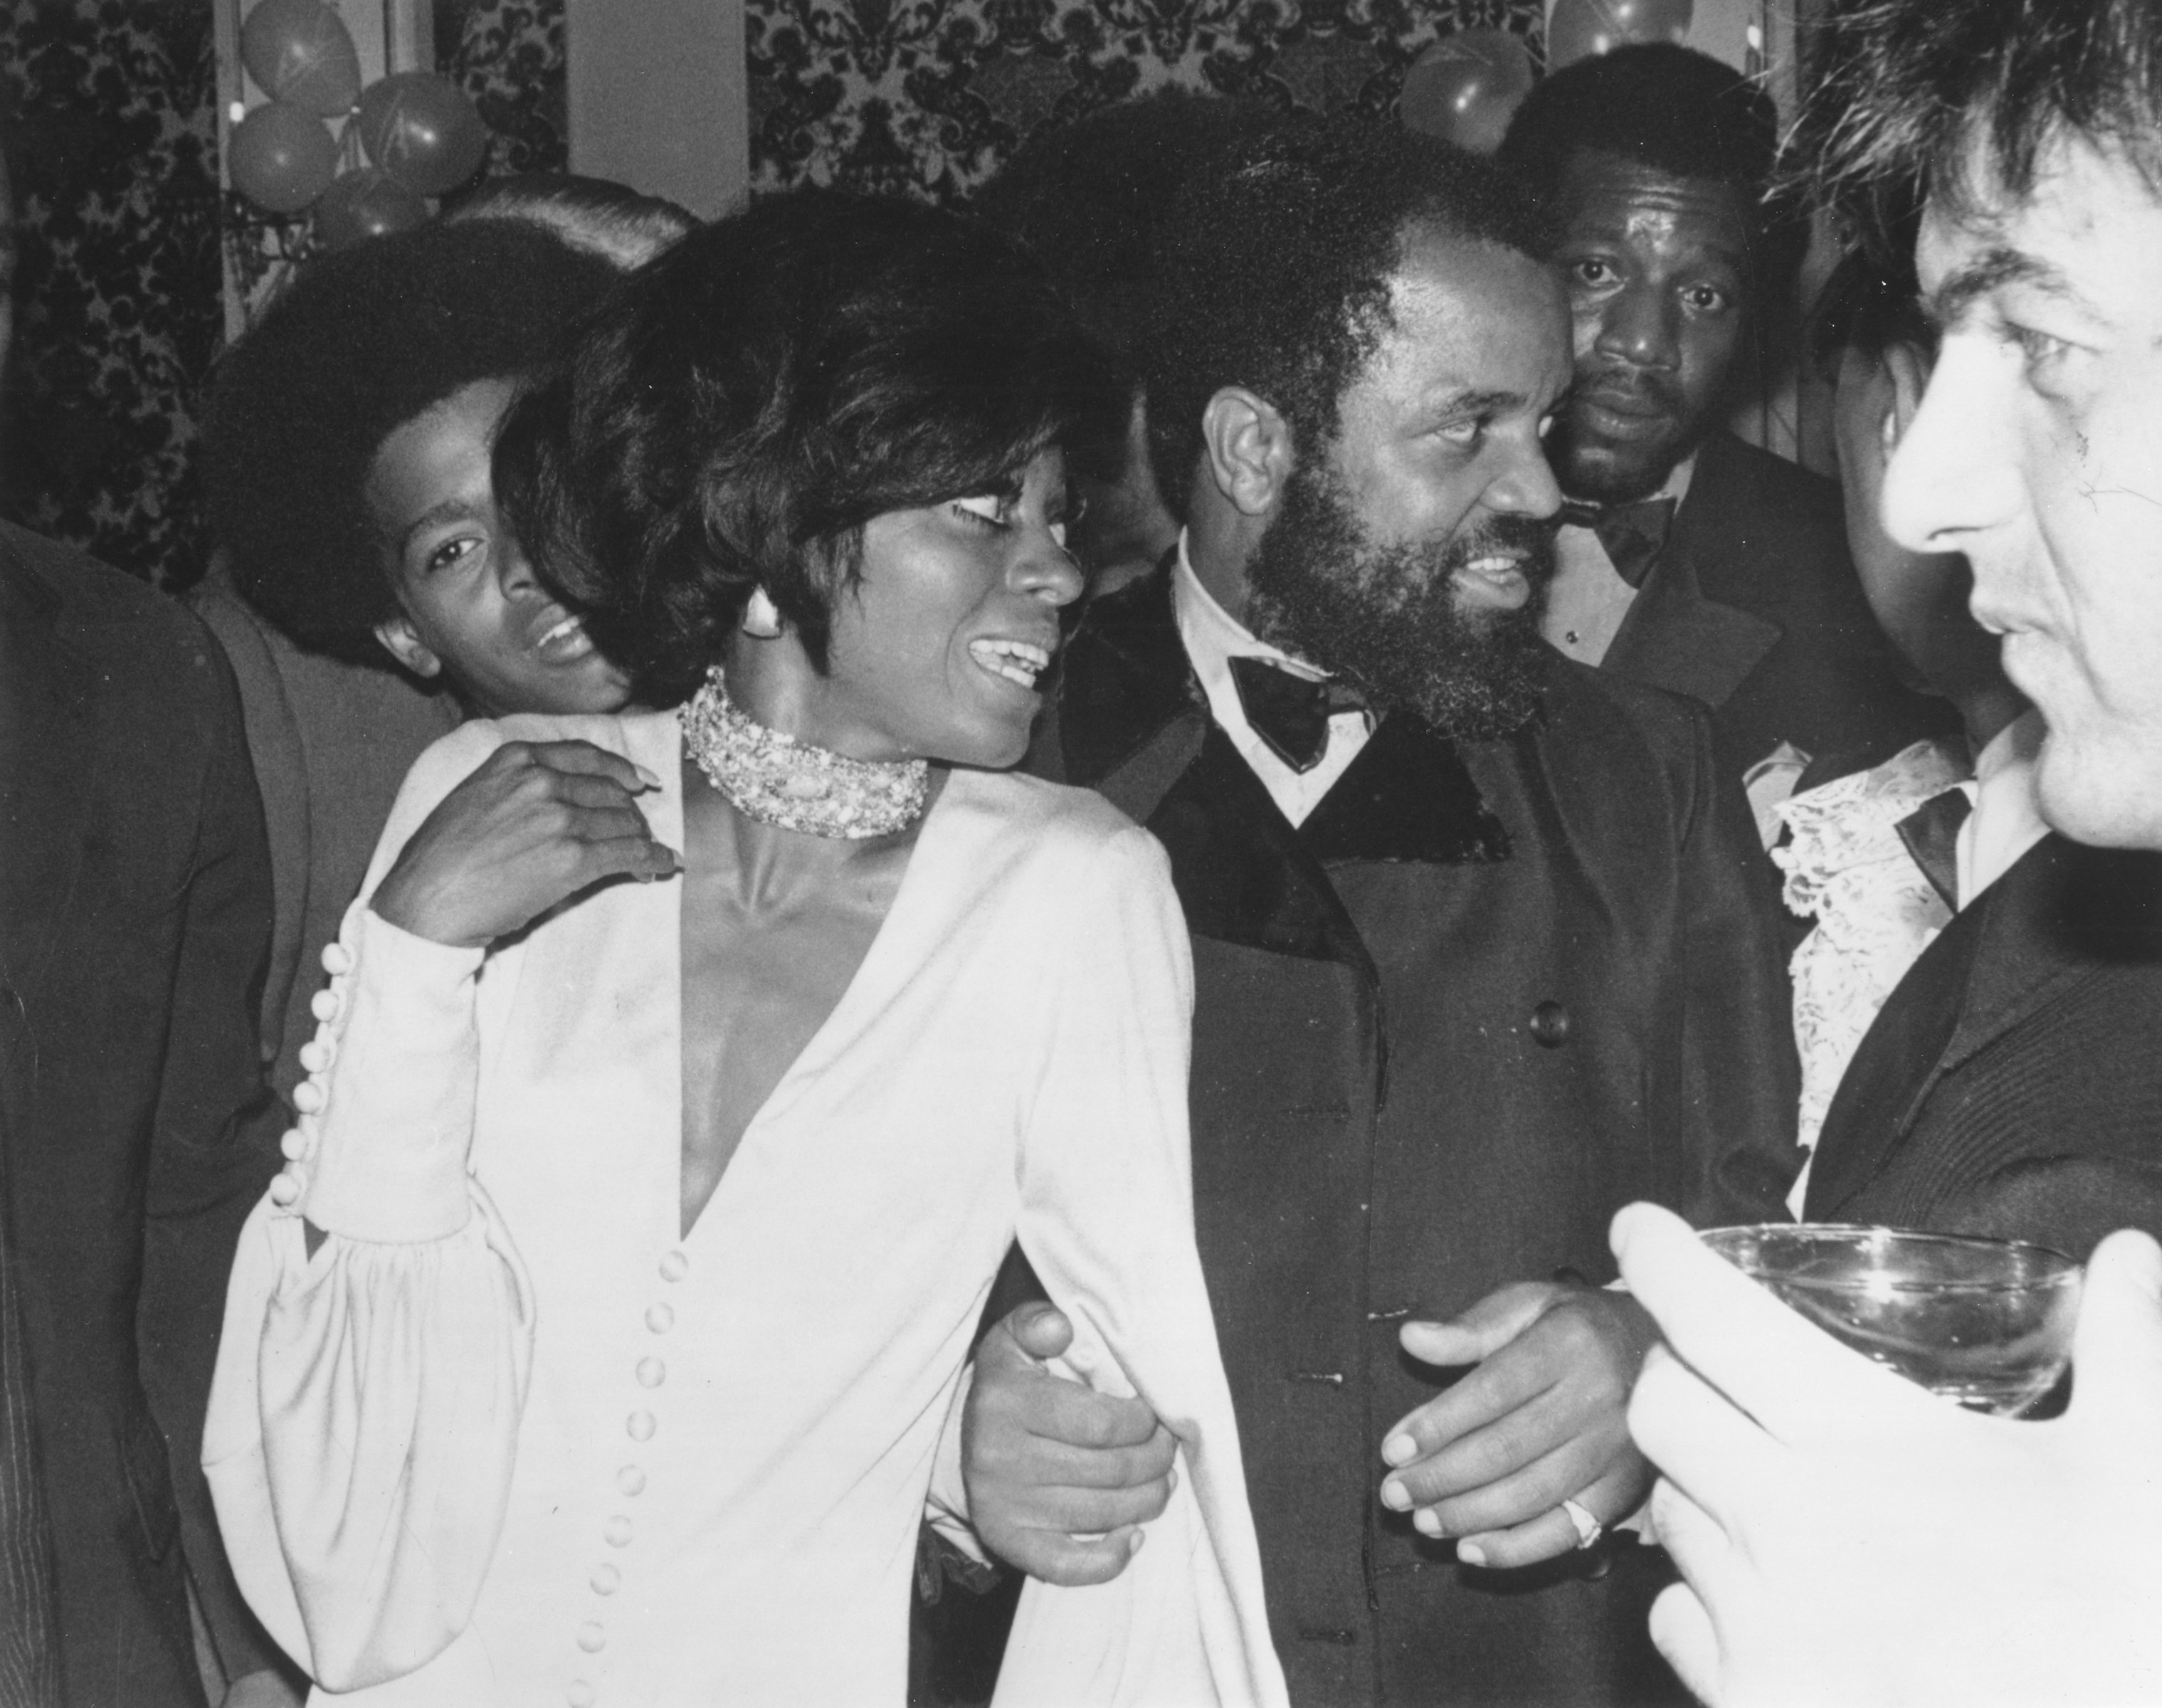 Diana Ross Met 1 of Her Husbands While Getting a Gift for Her Former Boyfriend, Berry Gordy